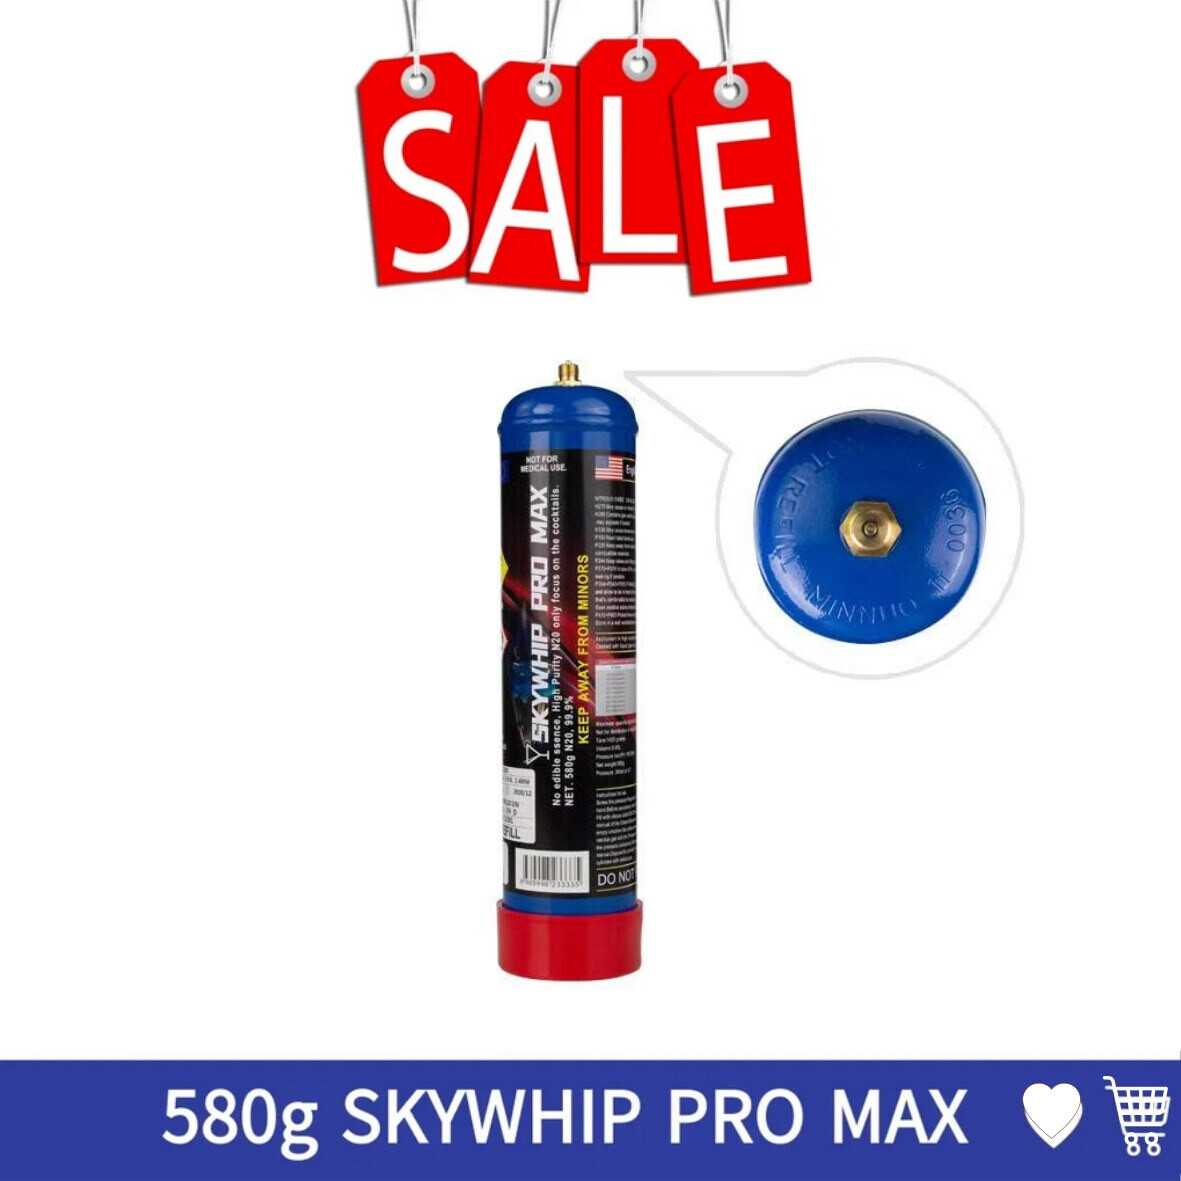 Cream Chargers: 580g Cylinder Skywhip Pro Max + Pressure Release Nozzle